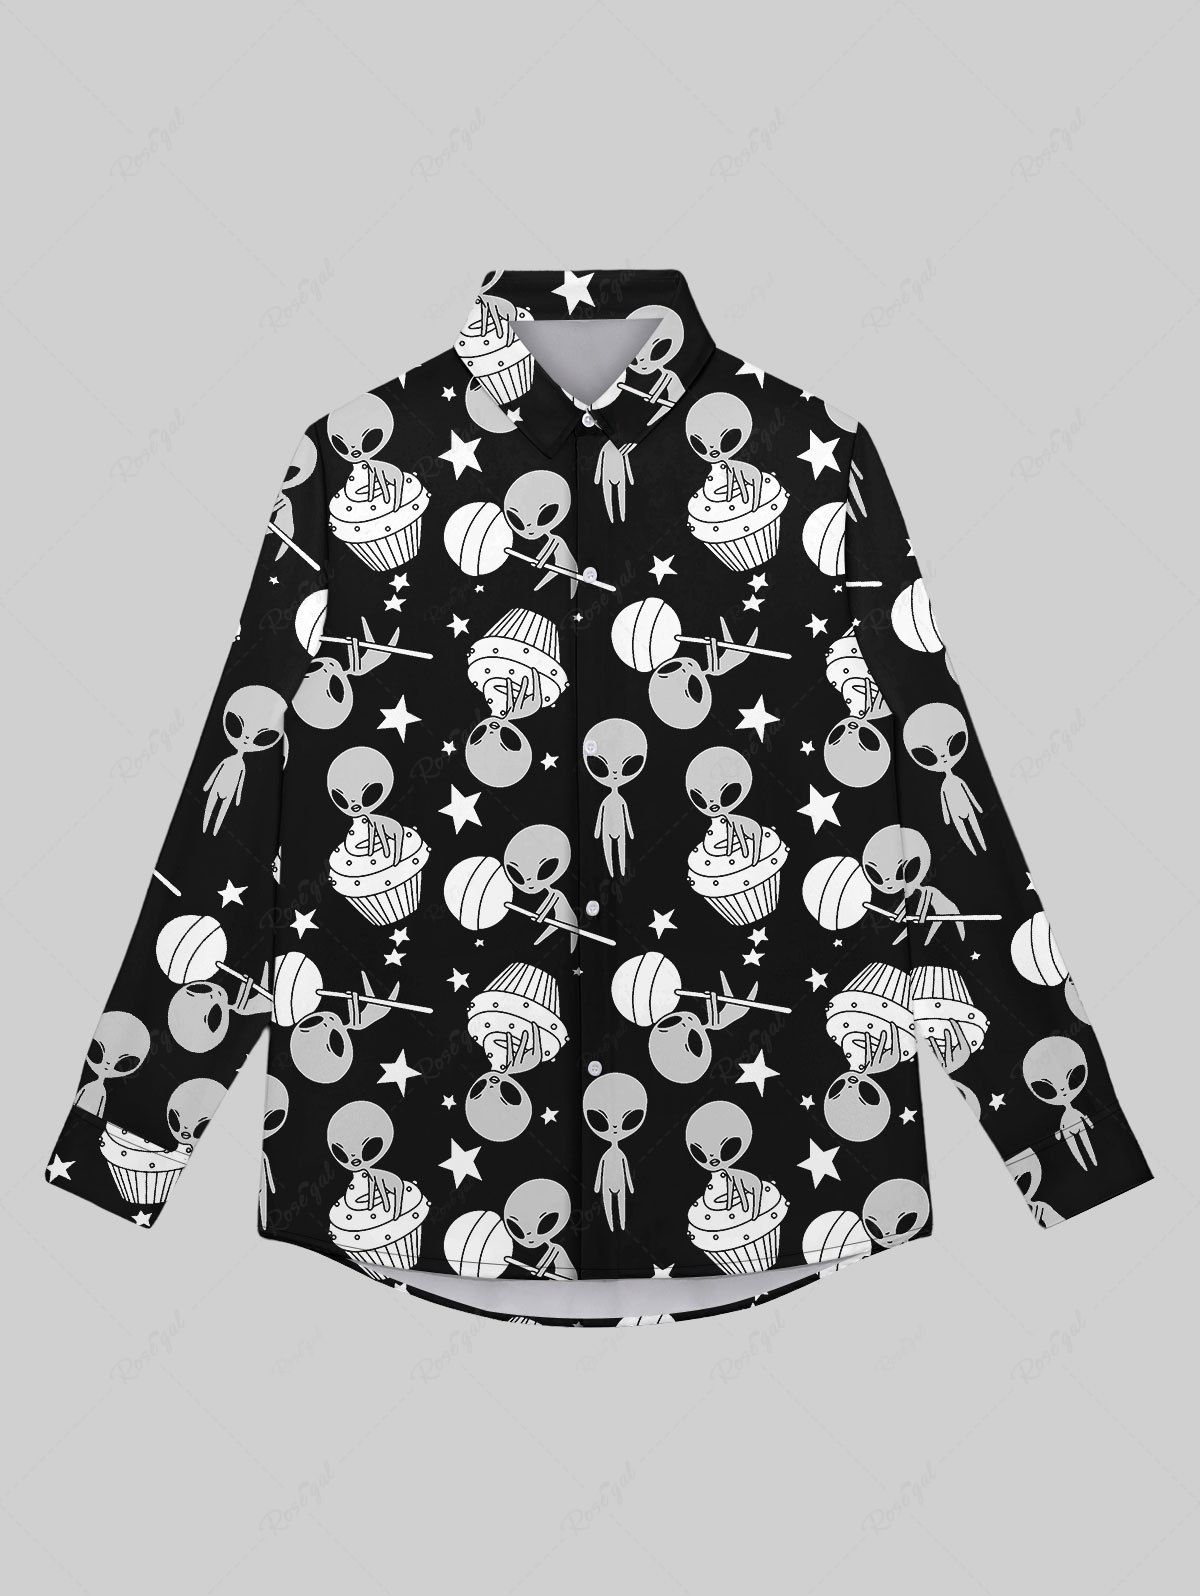 Sale Gothic Turn-down Collar Skull Alien Candy Ice Cream Stars Print Buttons Shirt For Men  